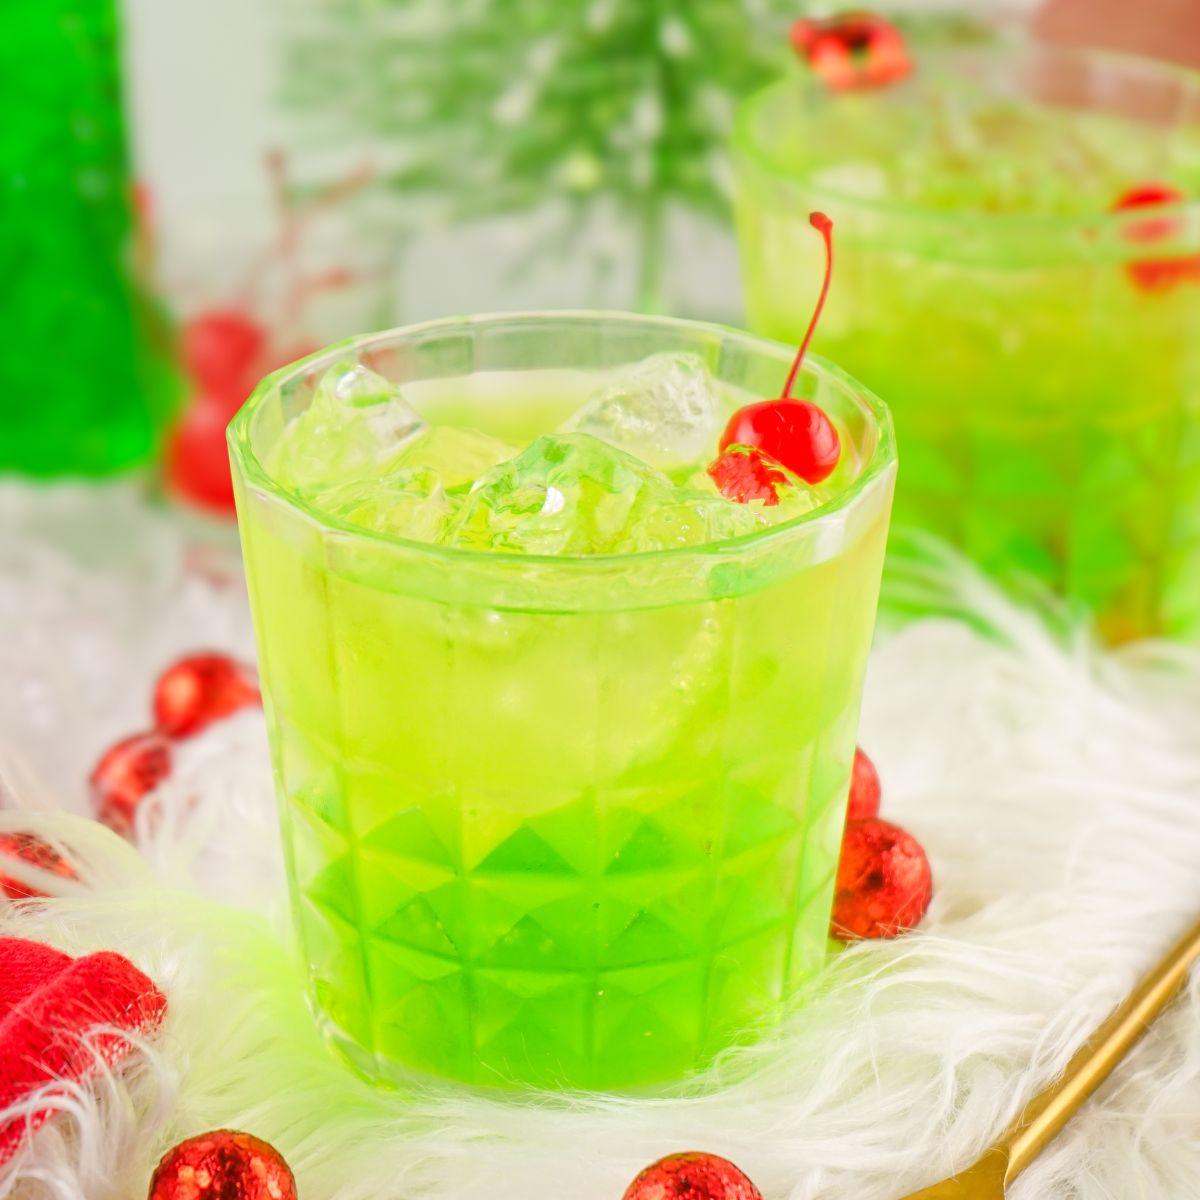 A green drink with a cherry on top.